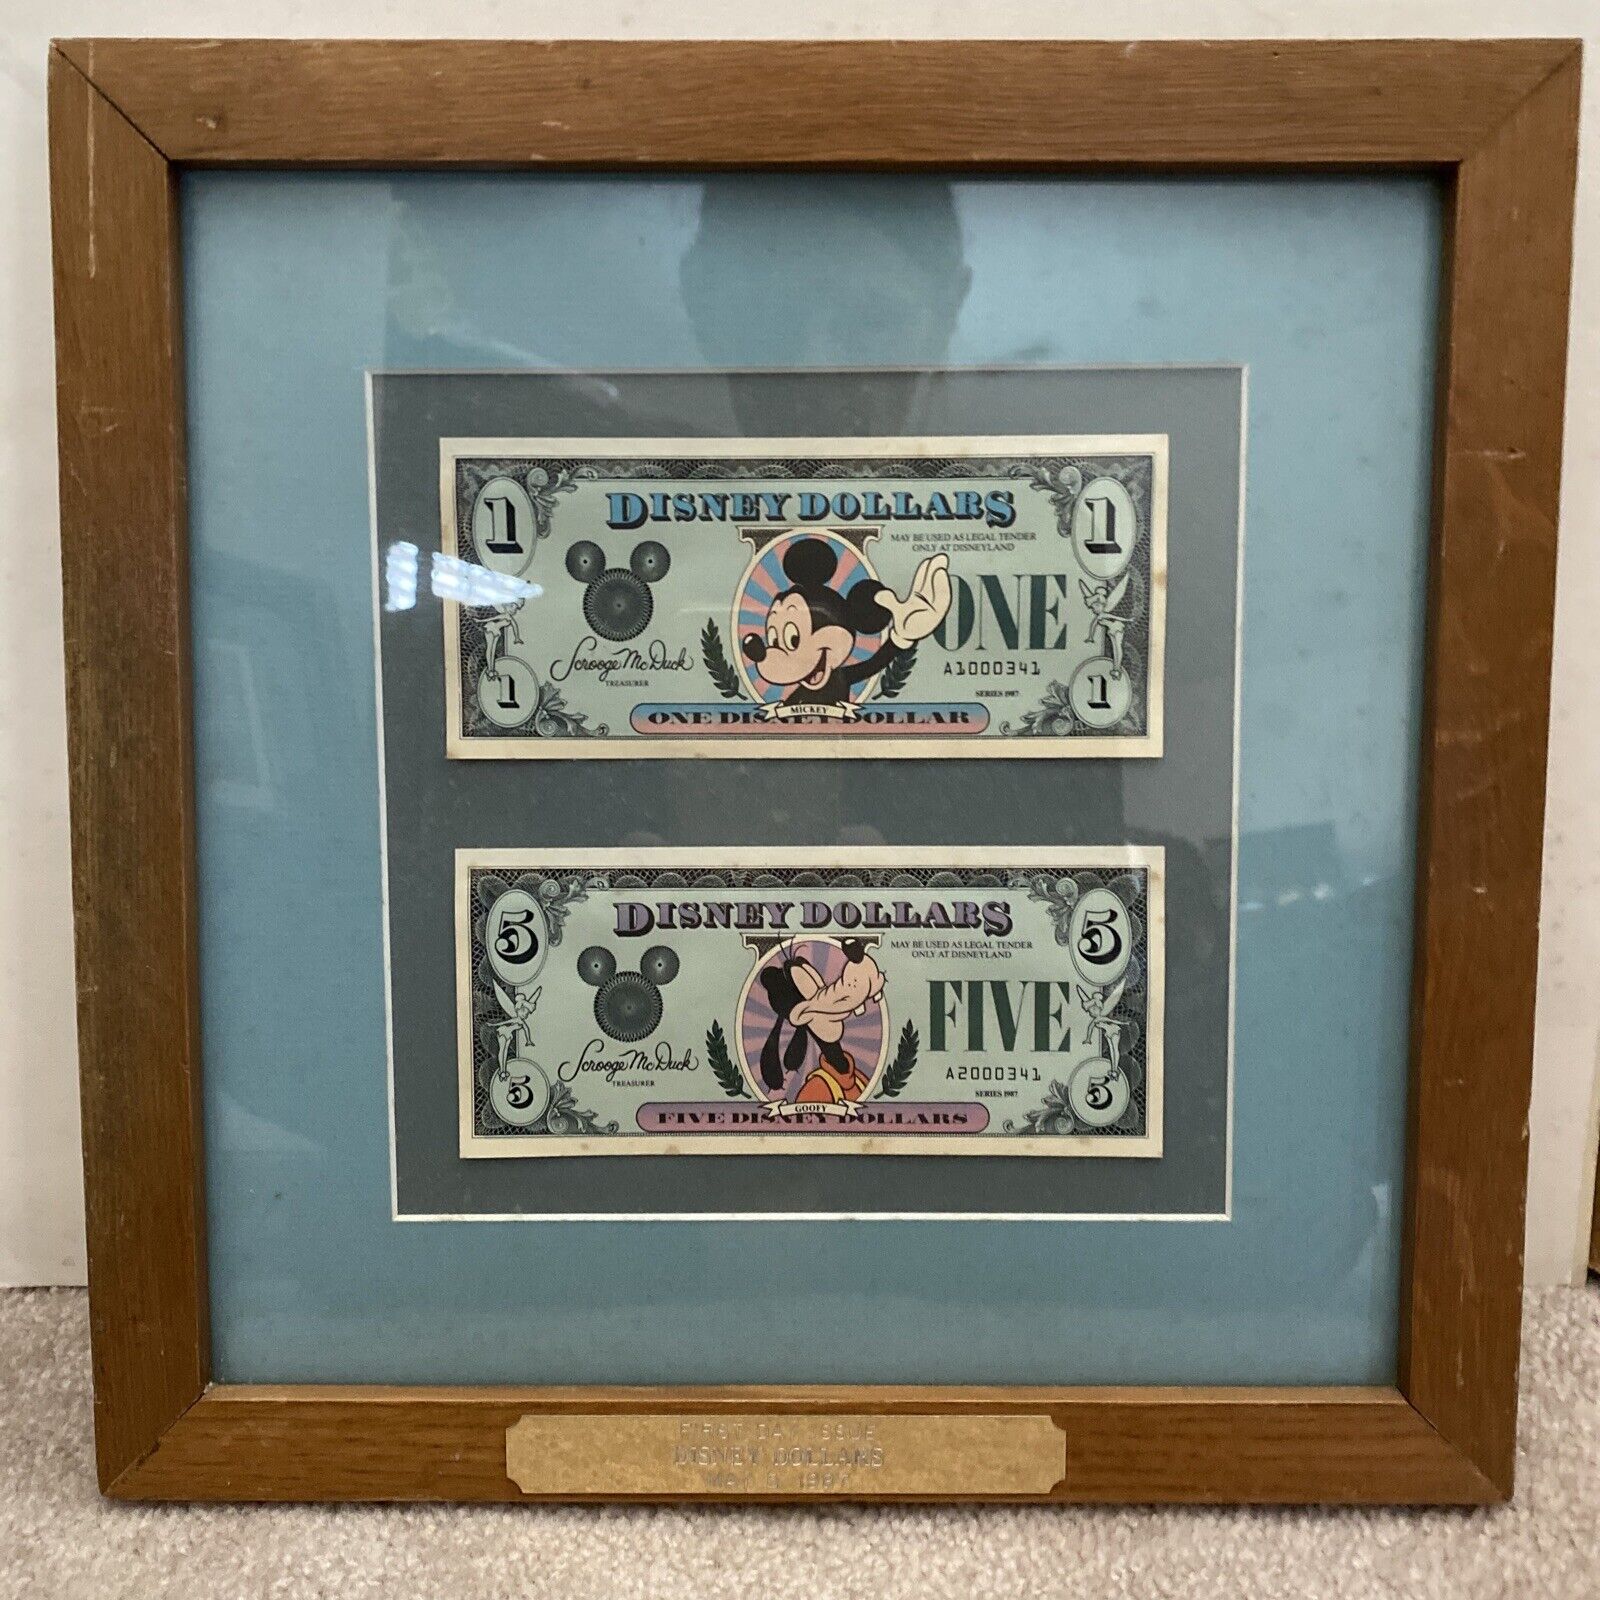 Disney Dollars May5,1987  Framed Mickey and Goofy First Day Issue